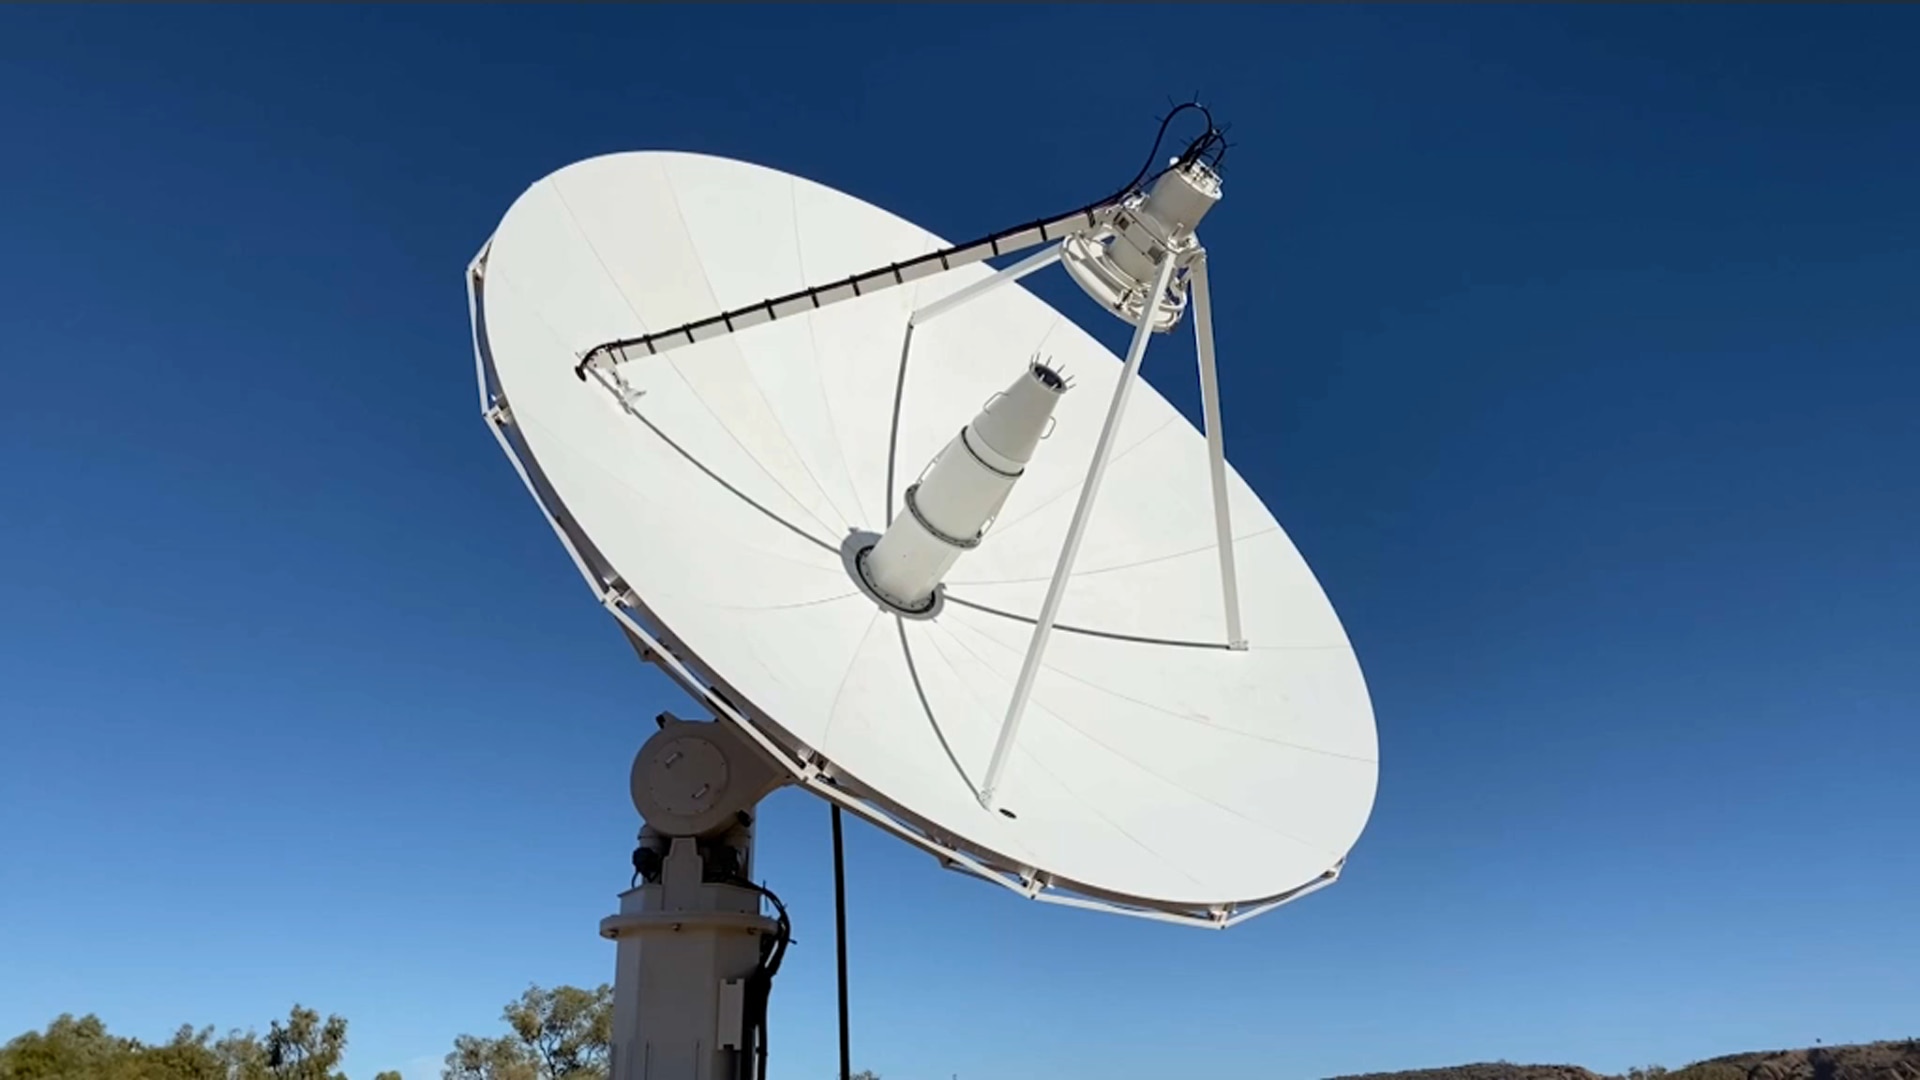 The facility has now become part of a global network known as Real-Time Earth ground stations.